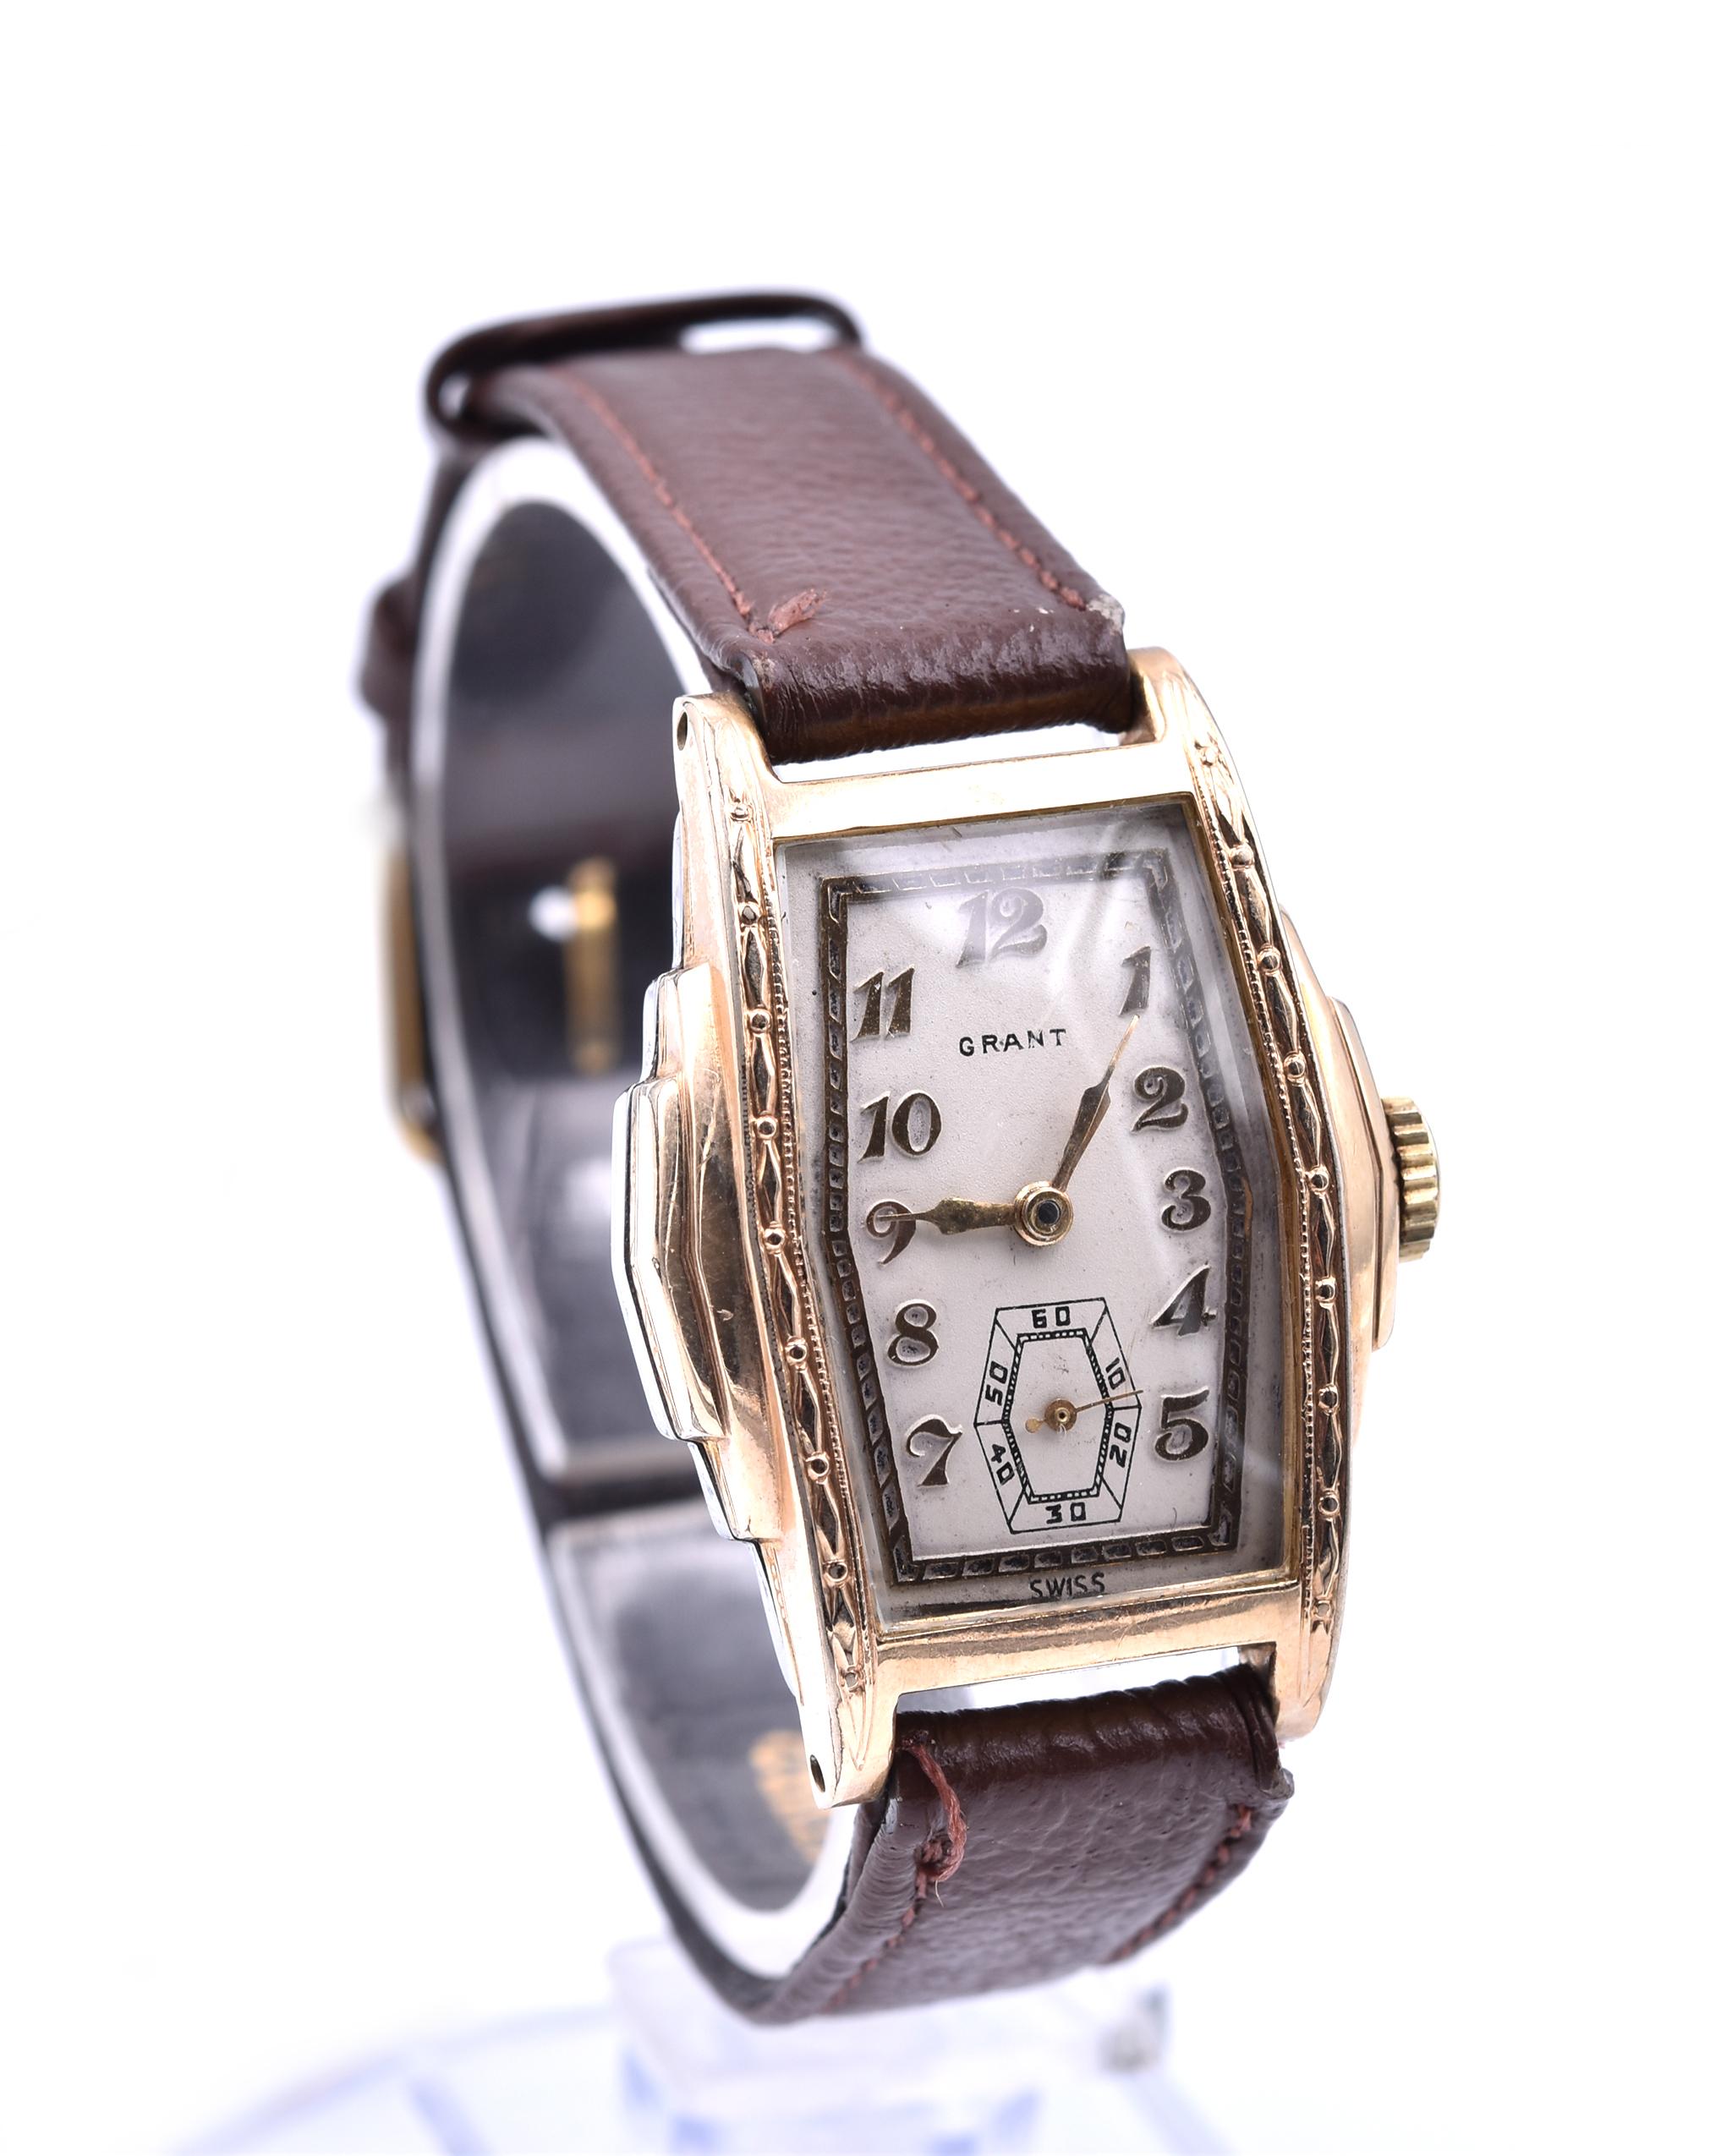 Movement: mechanical wind 7 jewels
Function: hours, minutes, sub-seconds
Case: rectangular 41.8mm x 30.4mm gold-tone stainless steel case, solid case back, plastic crystal, pull/push winding crown
Dial: white dial with gold-tone hands, gold-tone